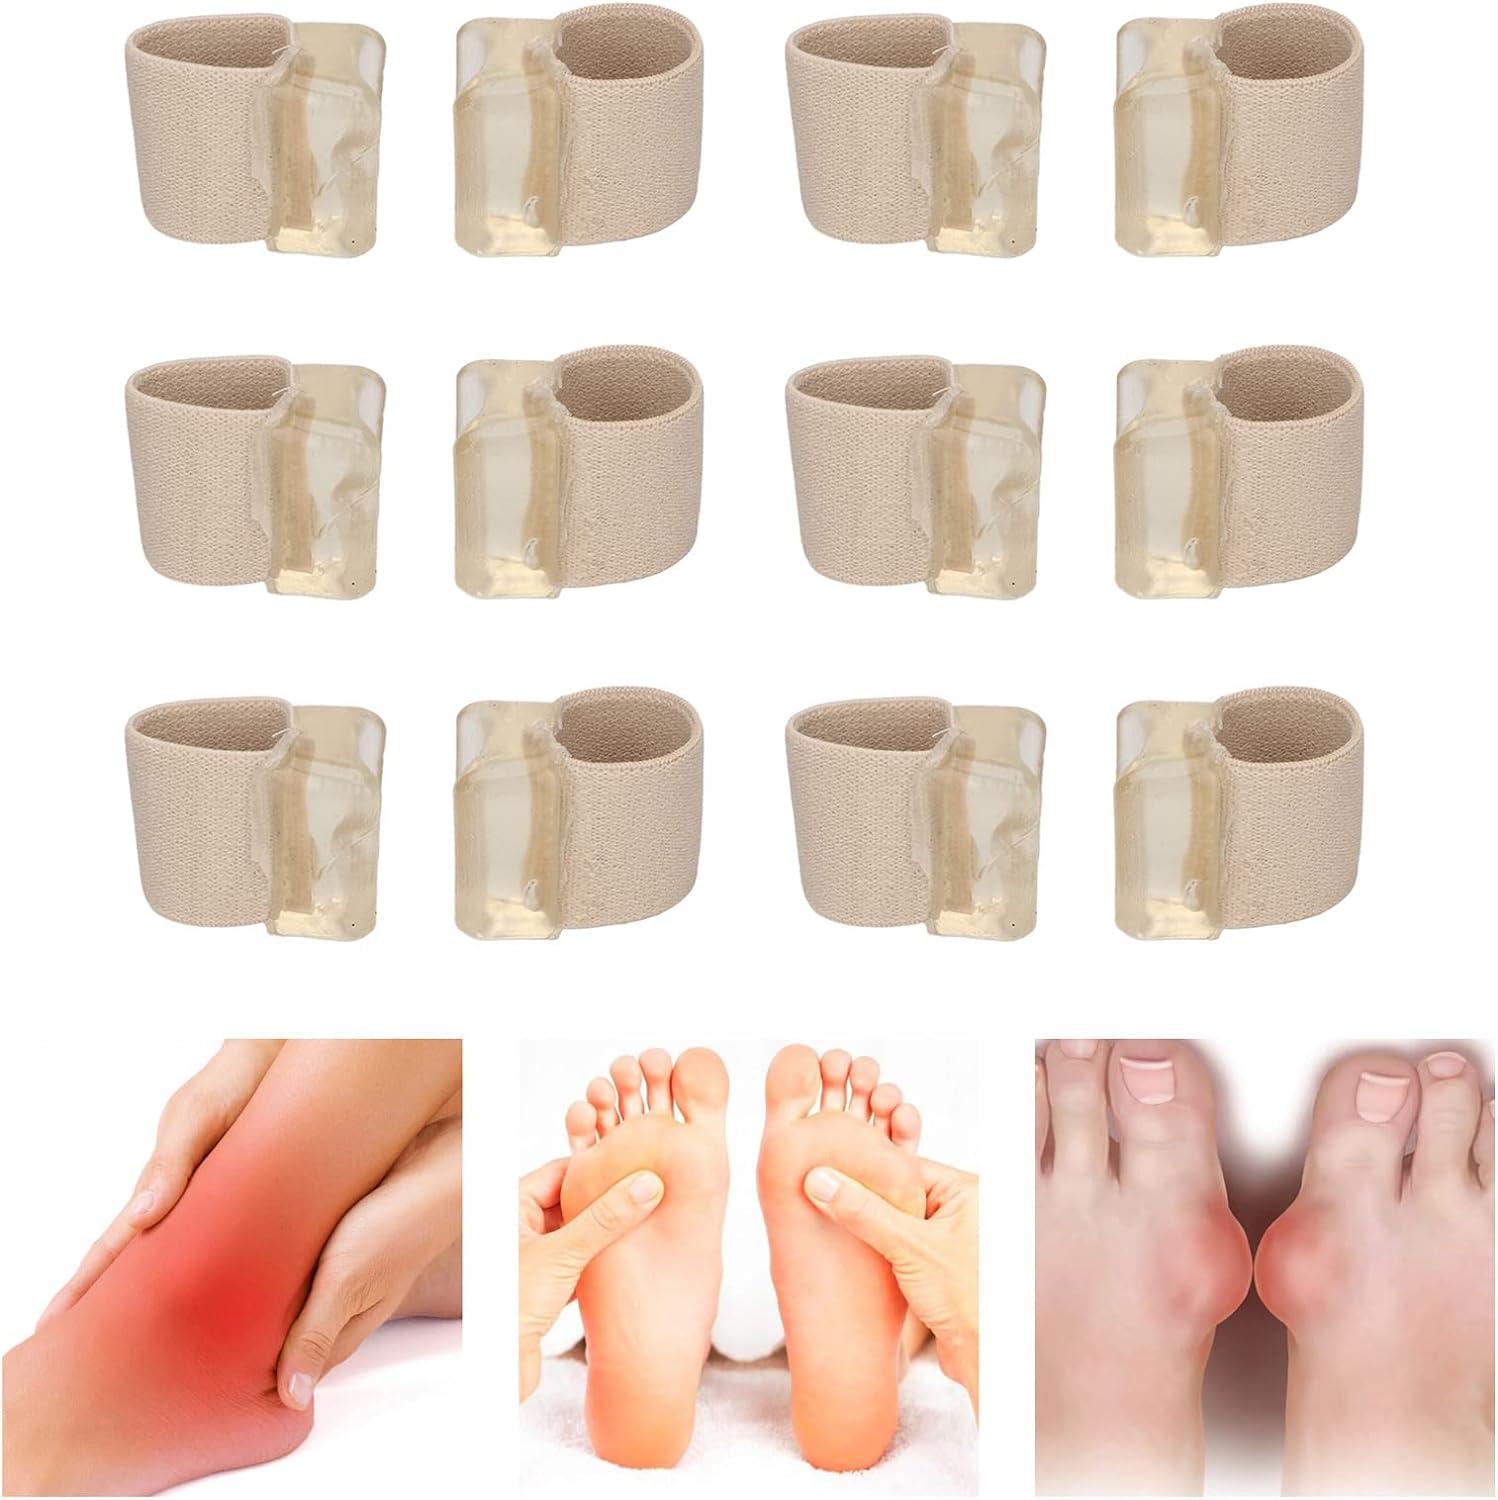 6 Pairs Toe Separator Elastic SEBS Reduce Pressure Prevents Friction Bunion  Corrector Soft Toe Corrector for Hammertoes Bunions Sports Nighttime Yoga  Practice and Running